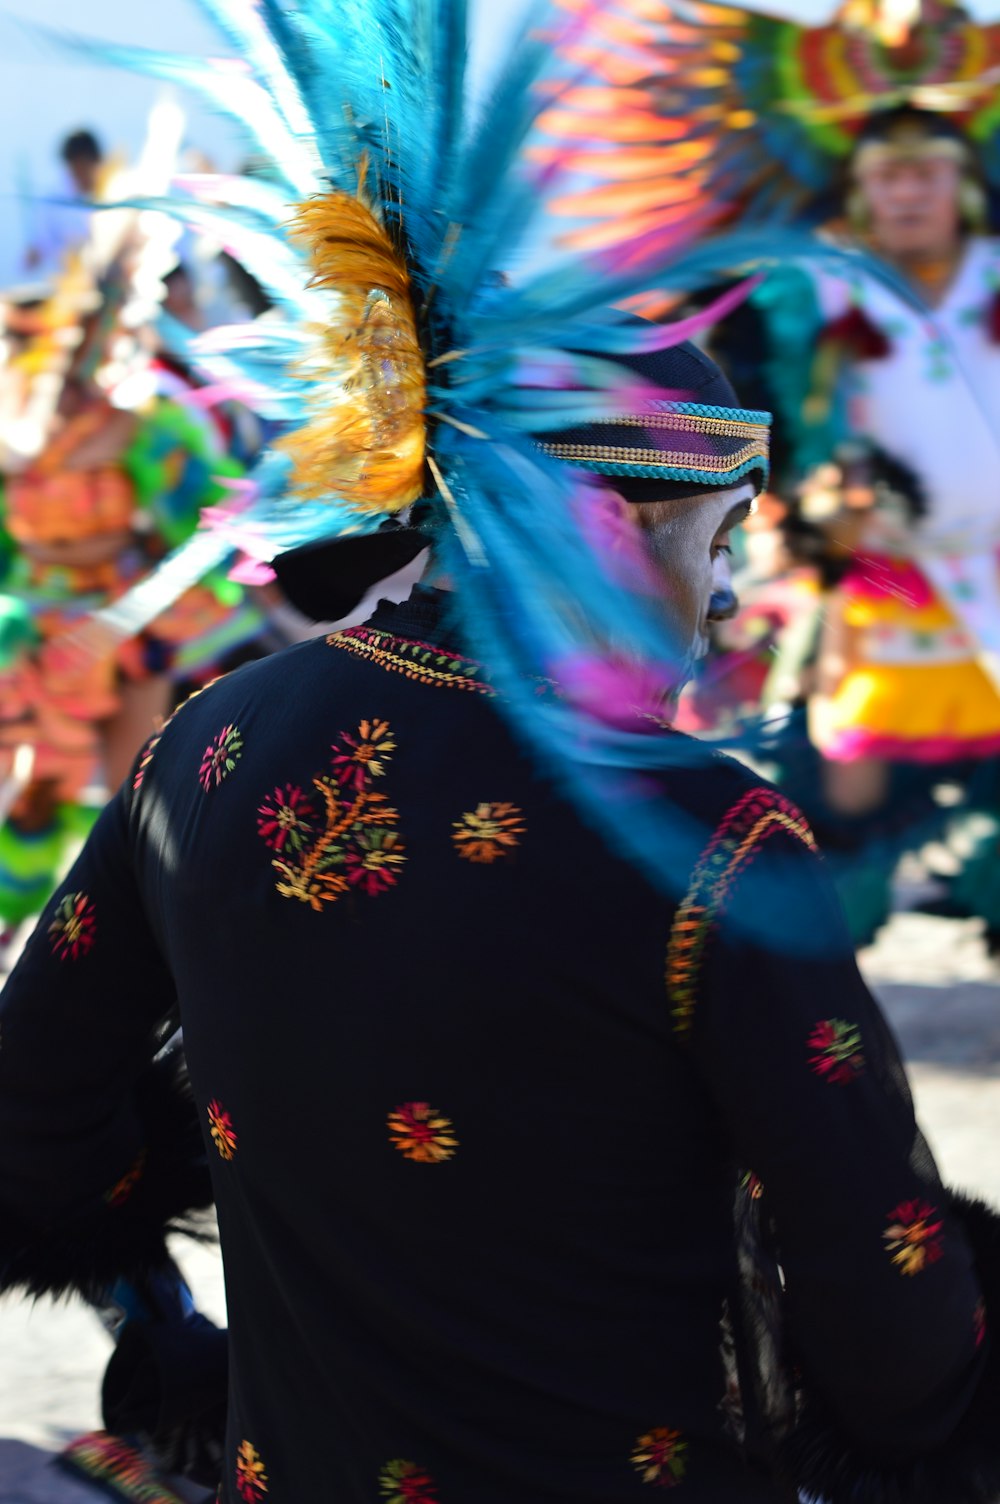 person in black blouse with headdress during daytime